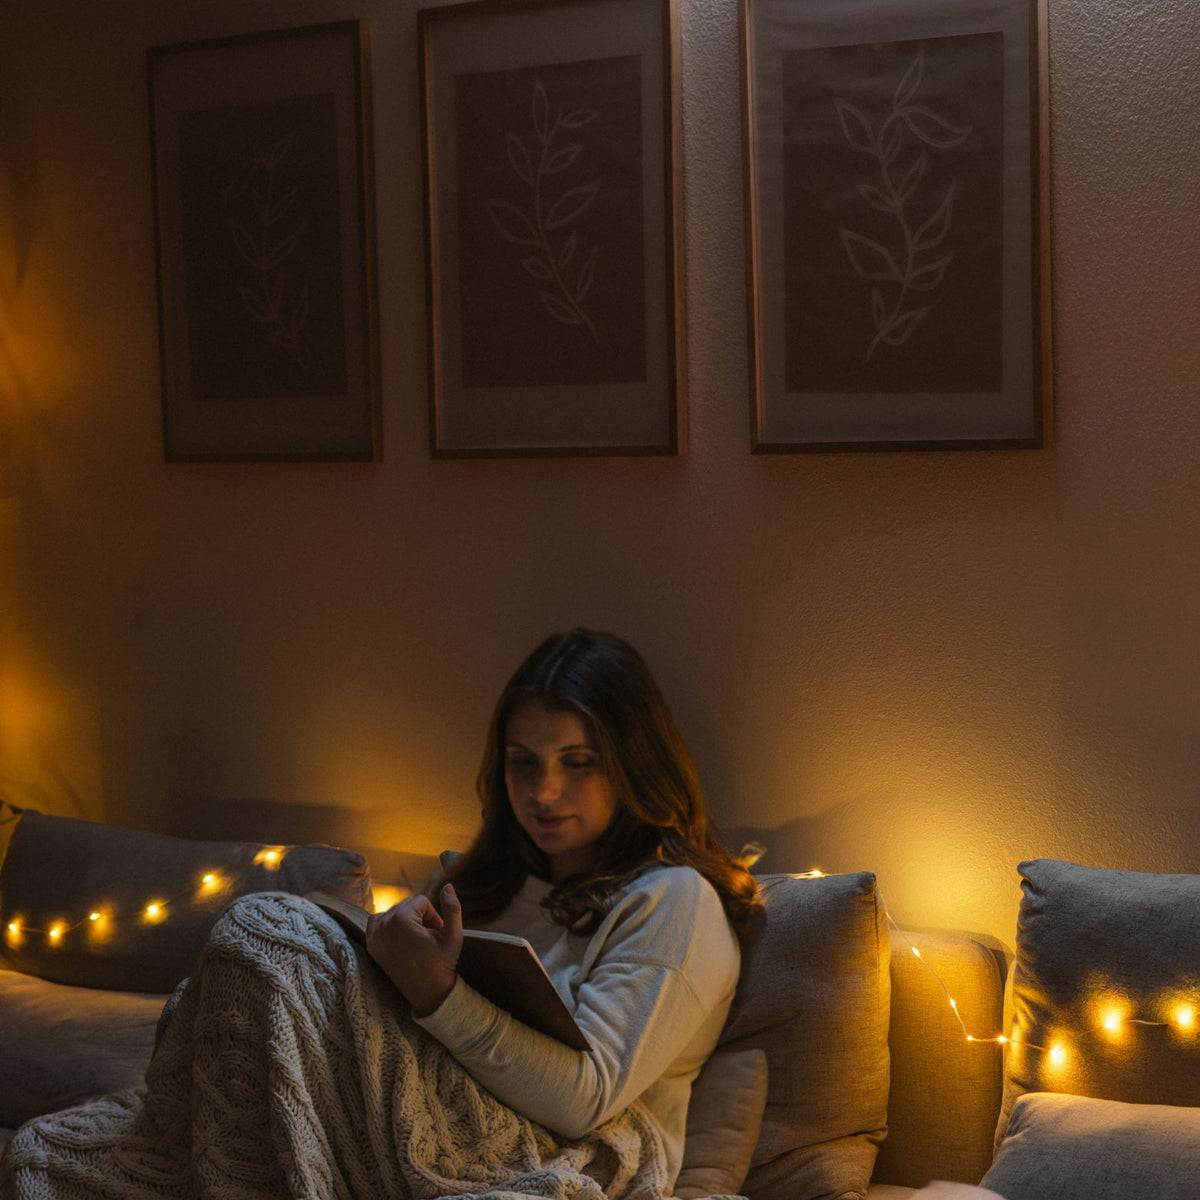 LuminAID Solar String Lights woman reading with string lights lit behind her on couch